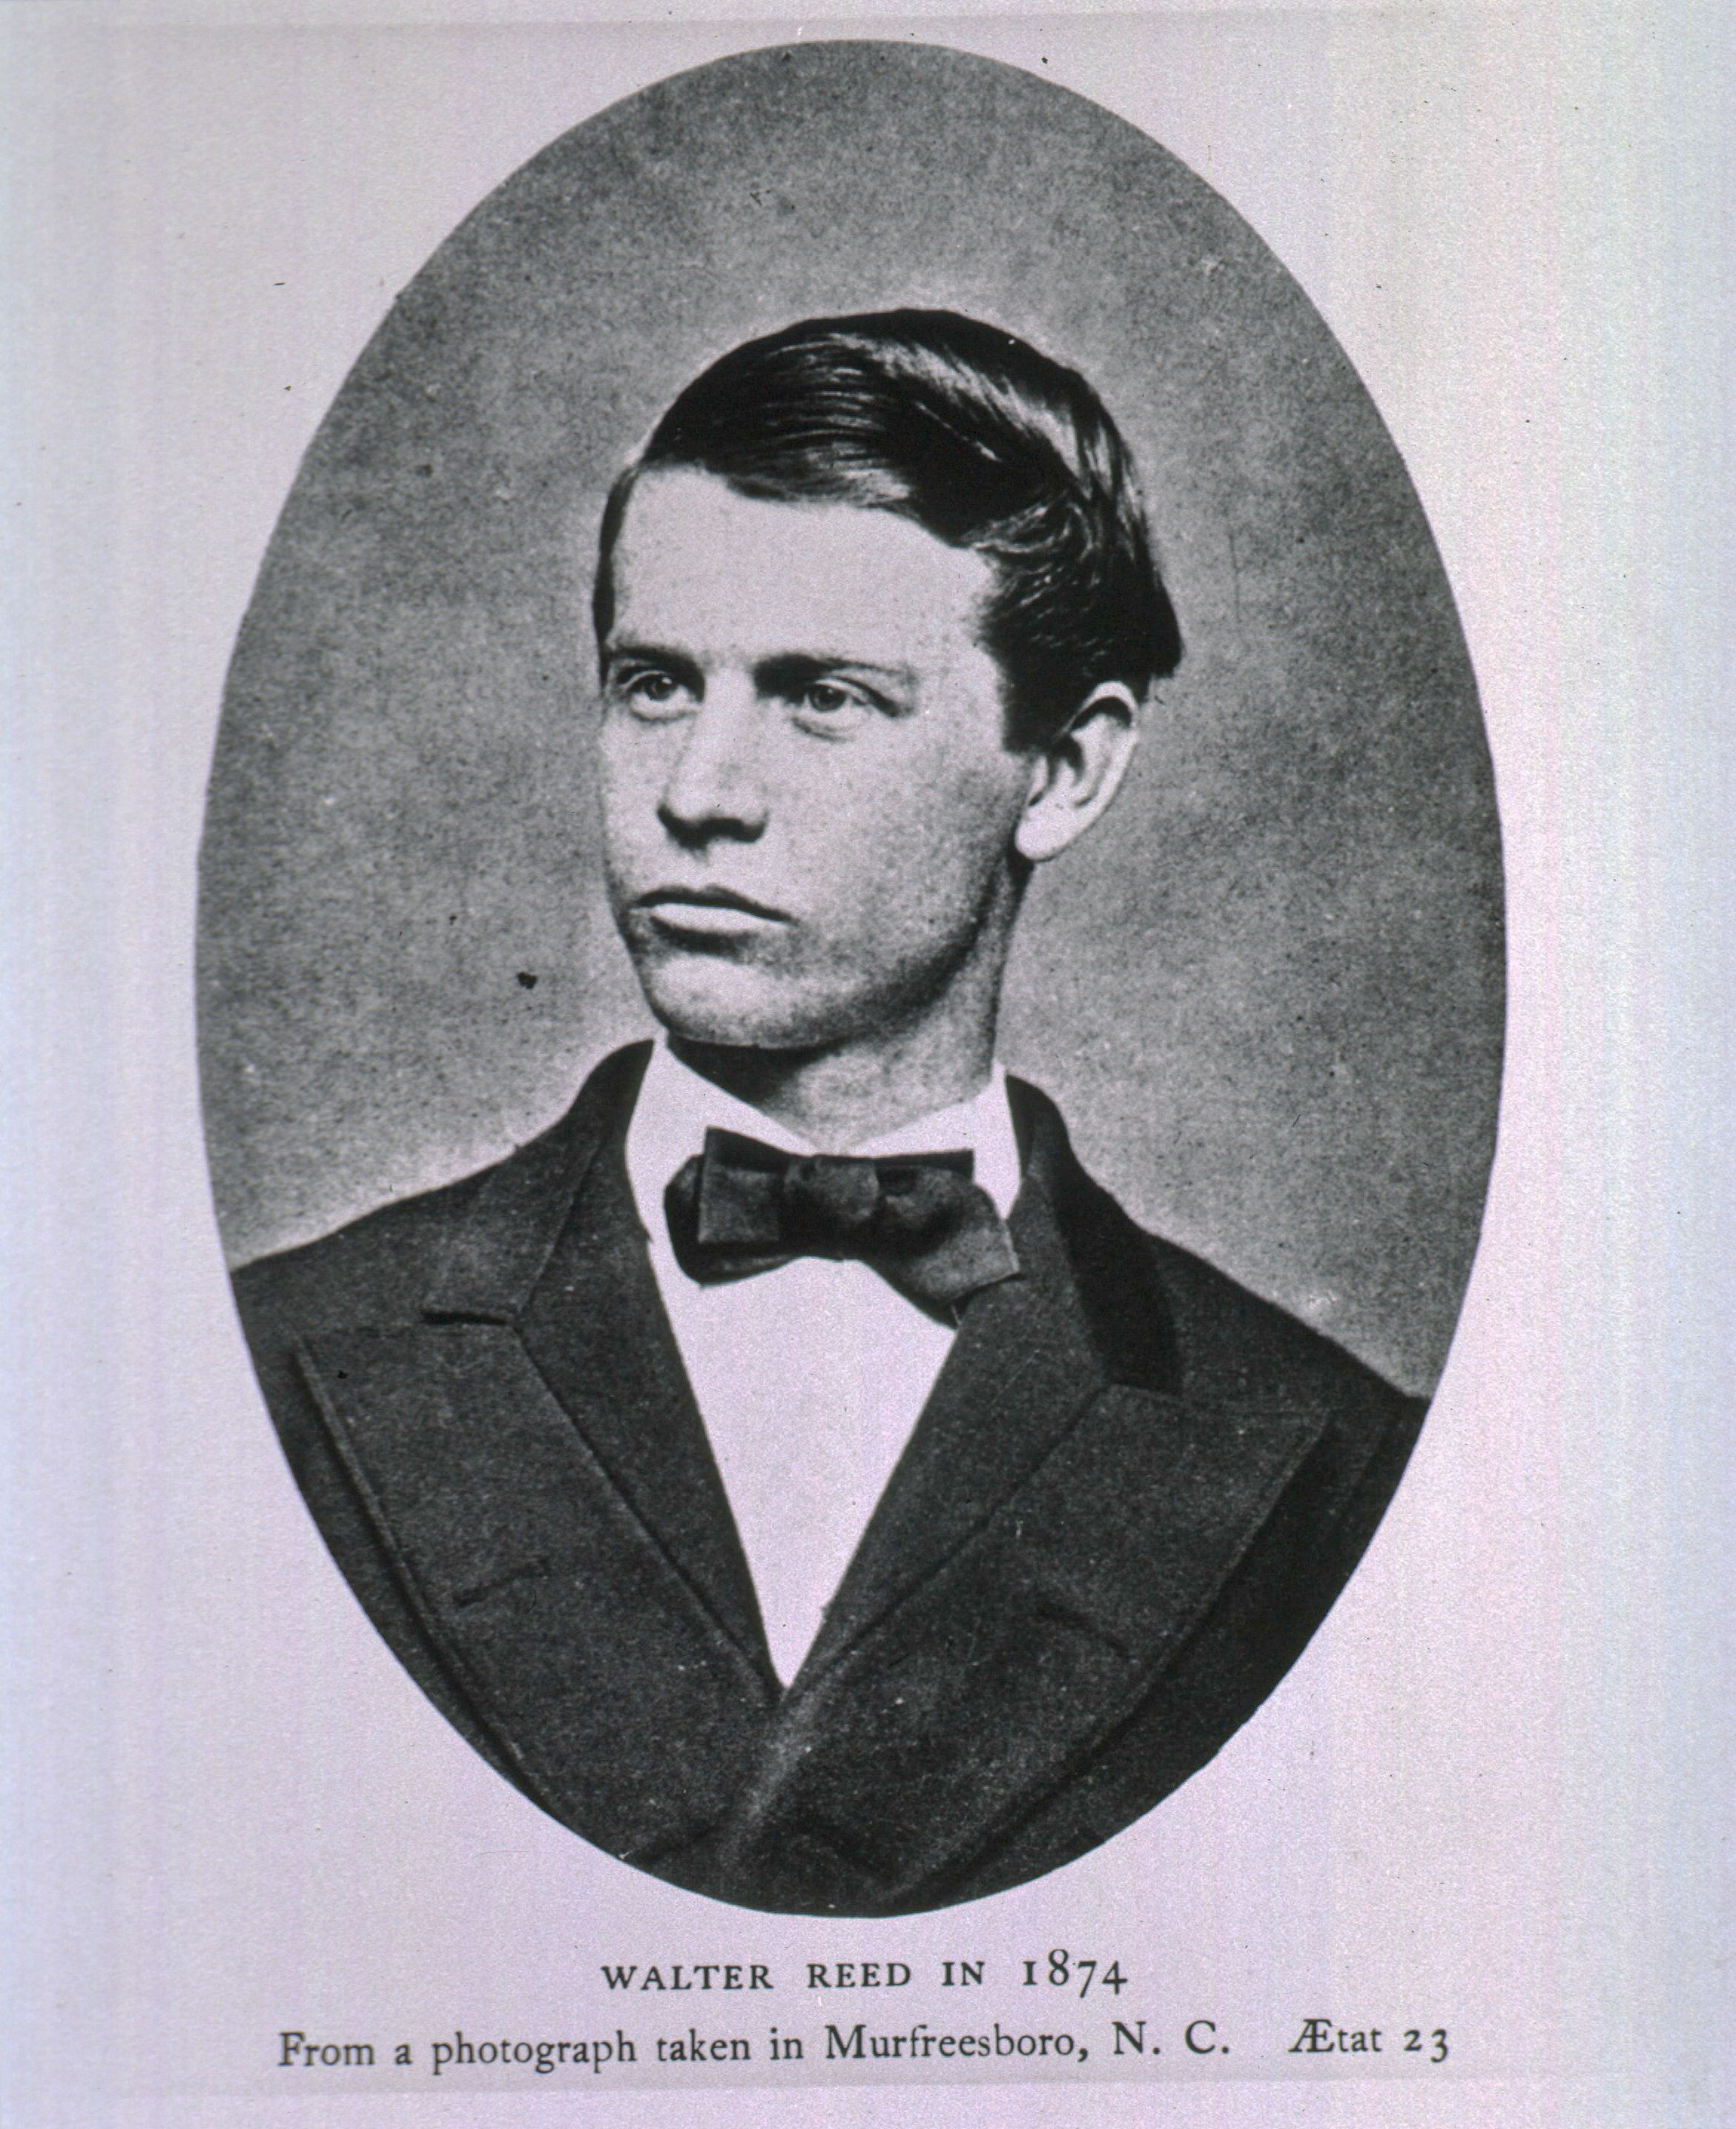 black and white photograph of Walter Reed in 1874 in Murfreesboro, North Carolina. He is a young looking man with short hair, wearing a black bowtie and white collared shirt.